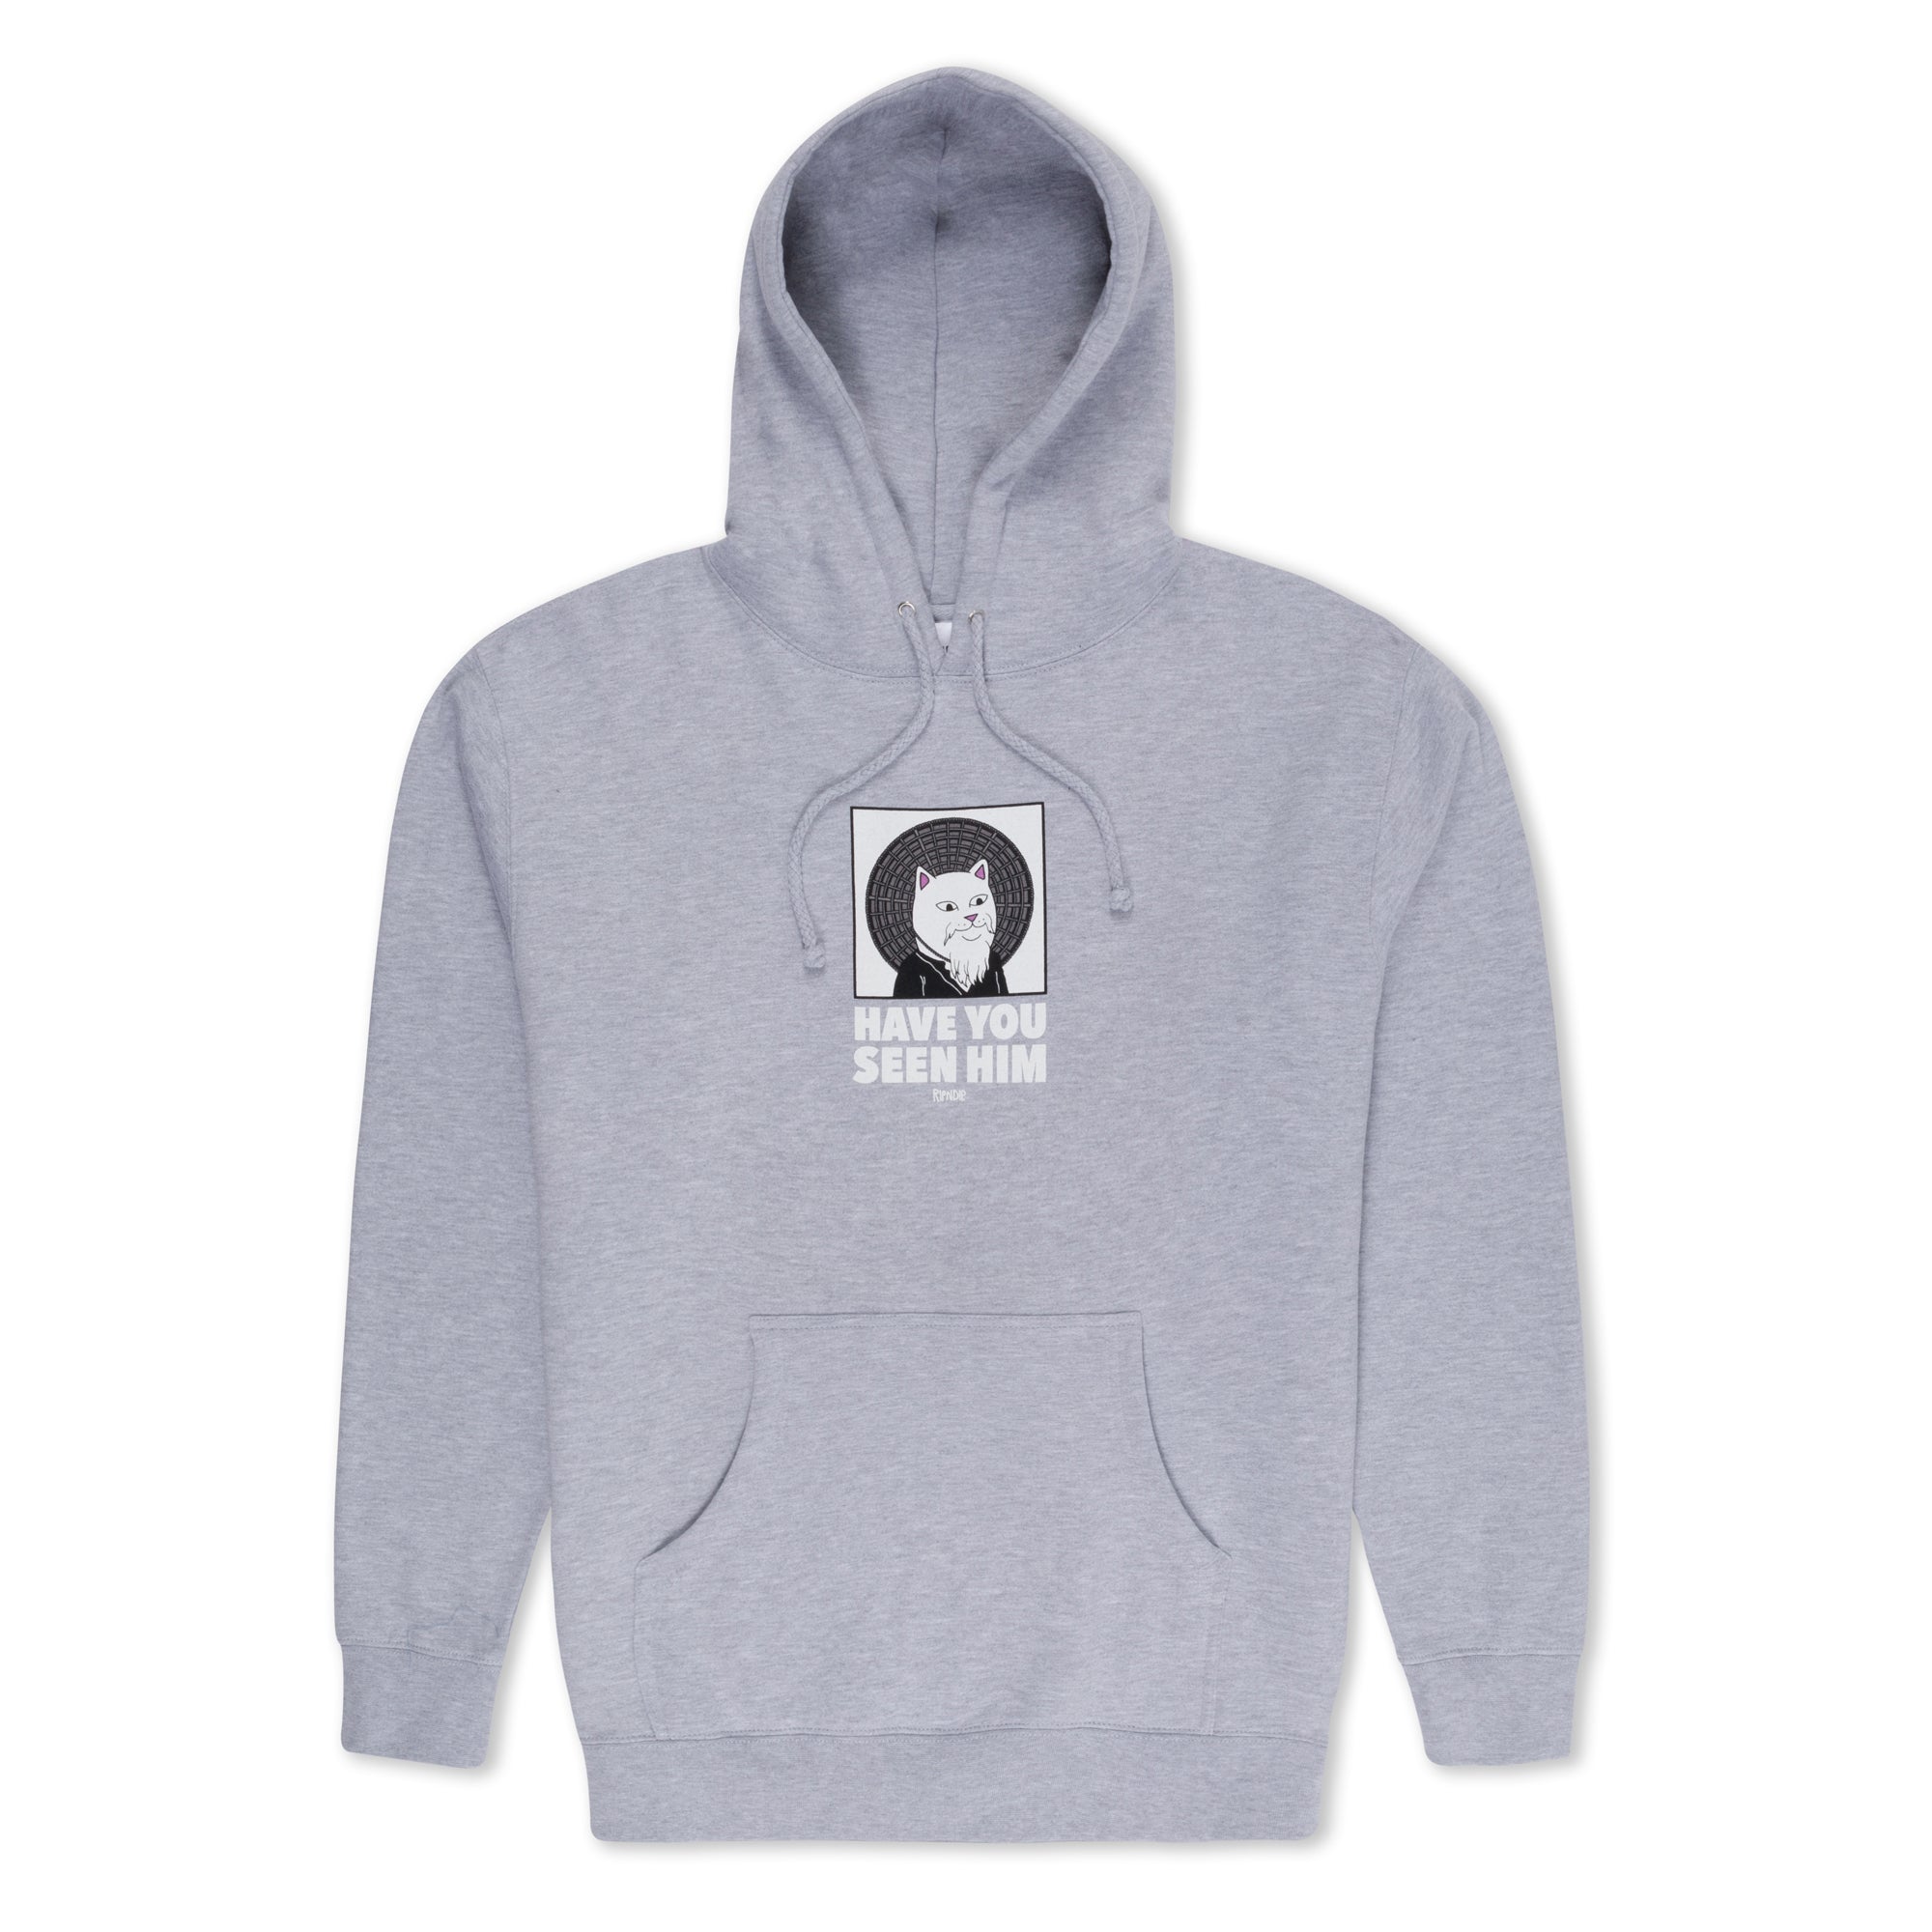 Have You Seen Him? Hoodie (Ash Heather)